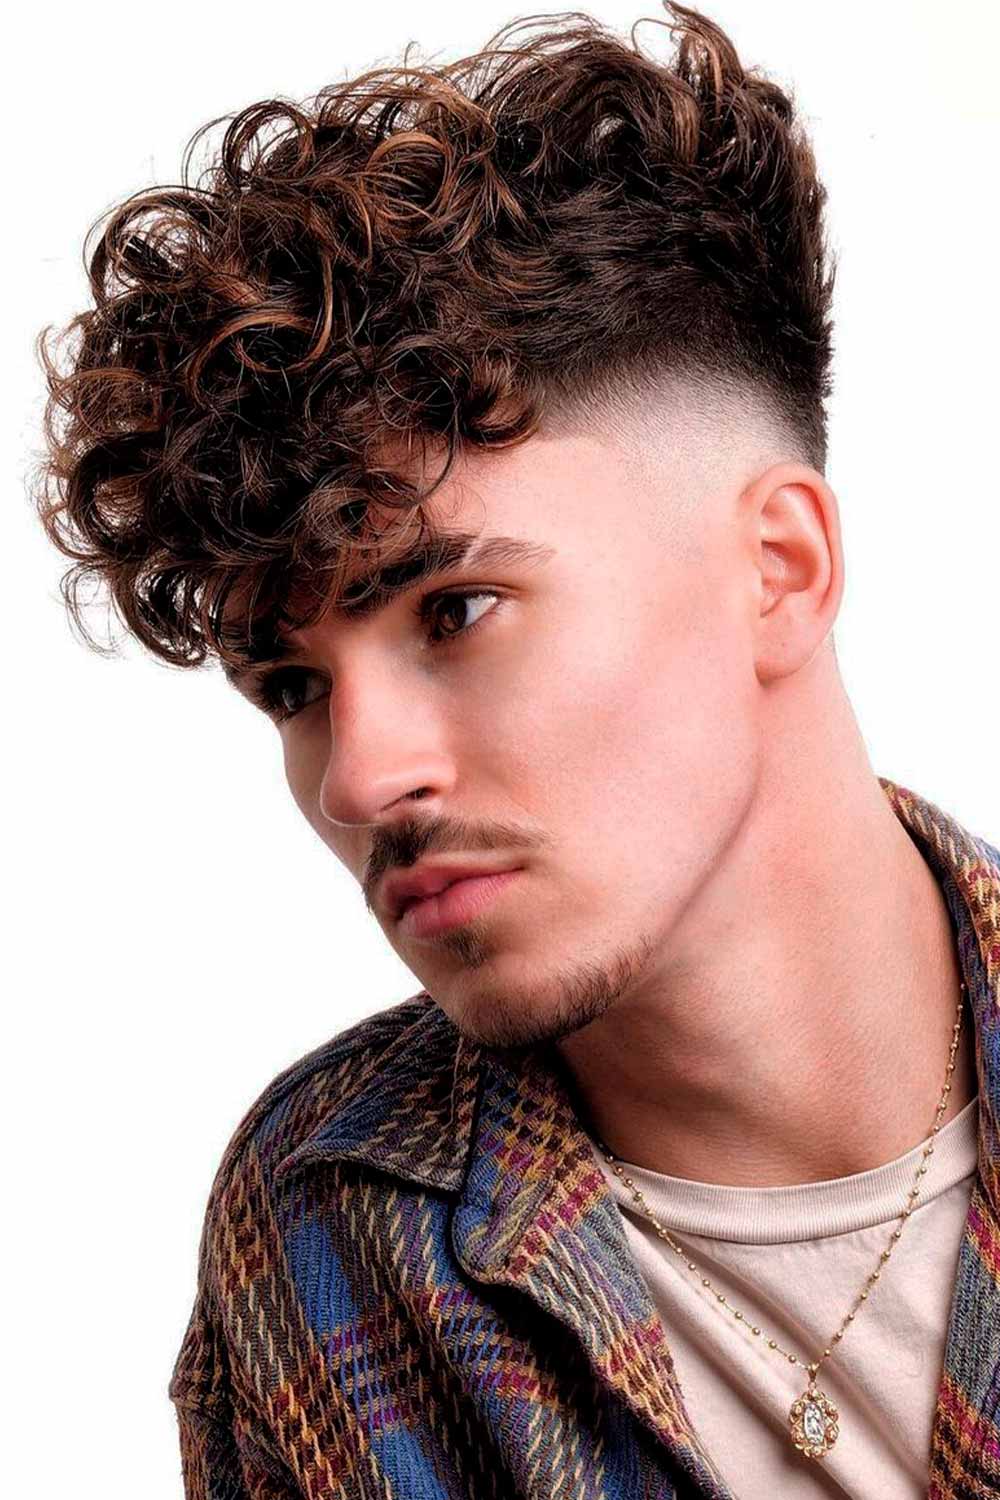 55+ Sexiest Short Curly Hairstyles For Men